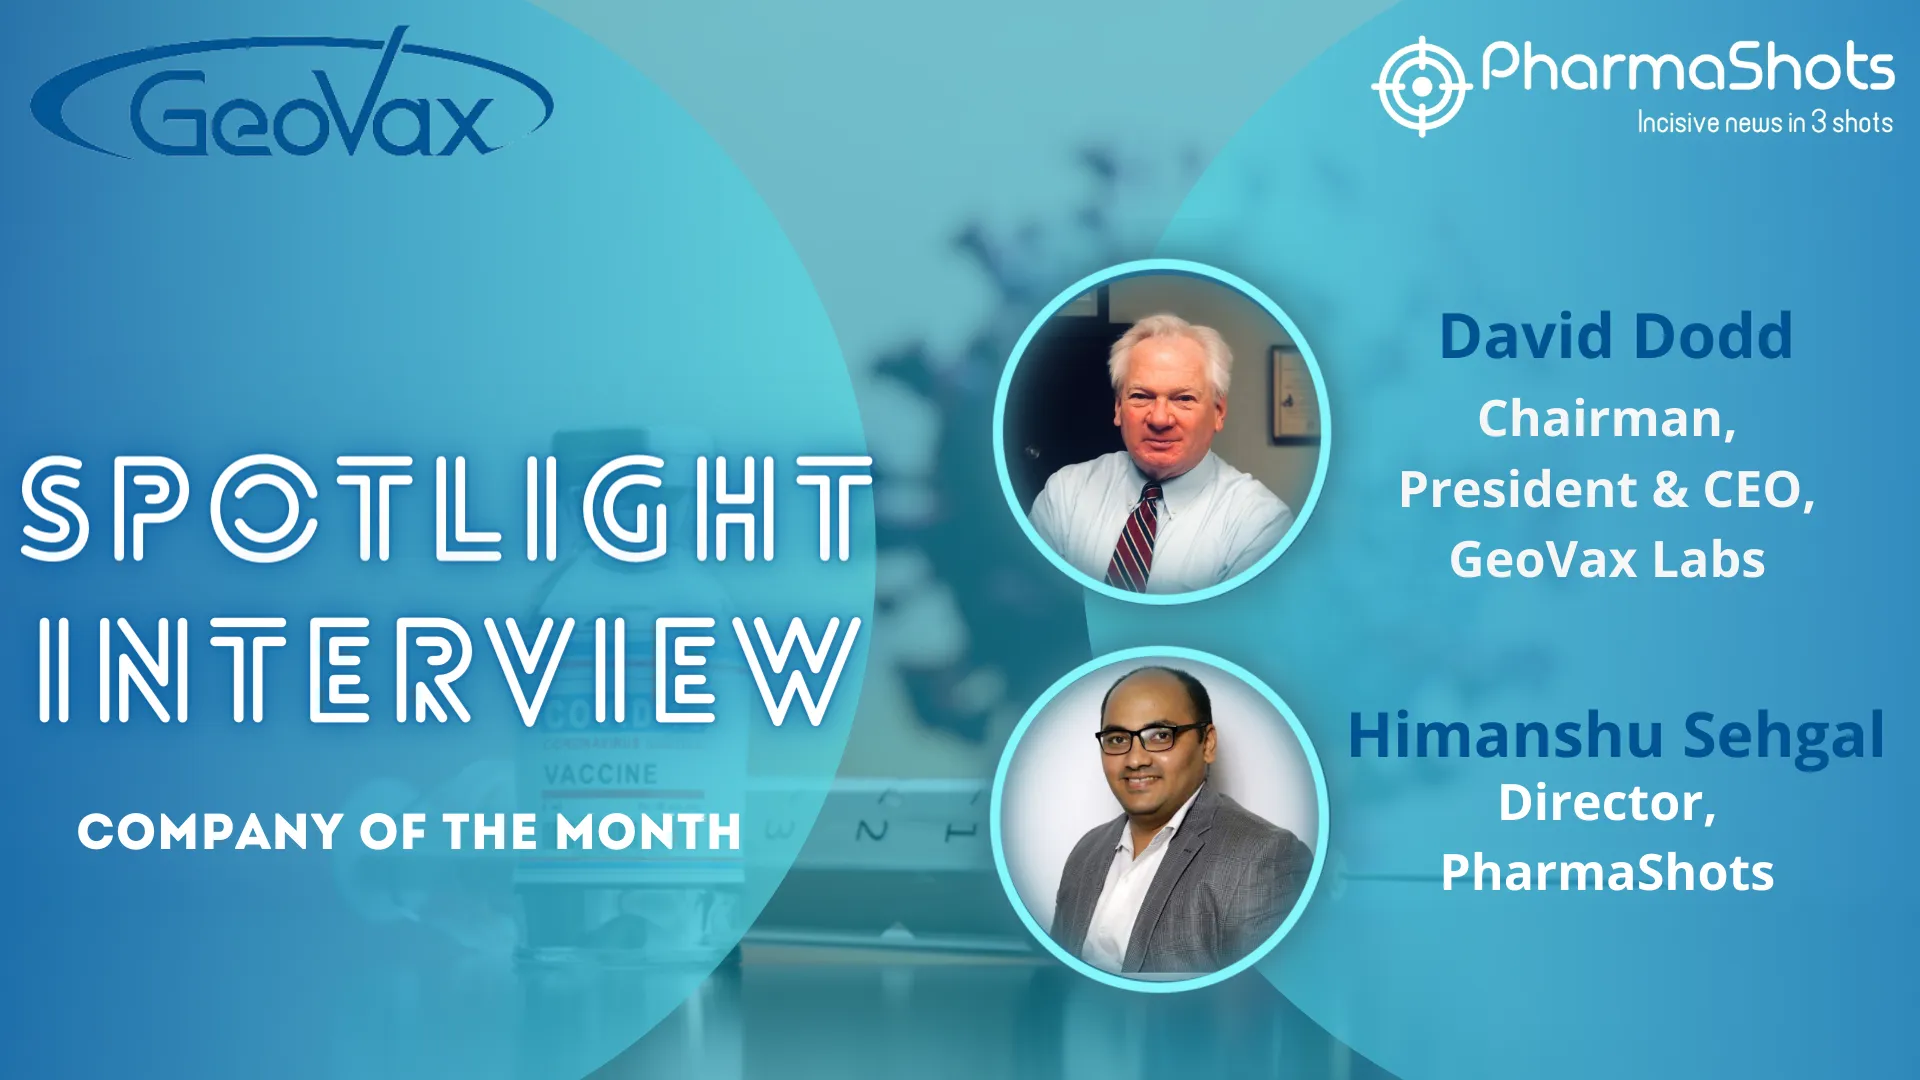 Spotlight Interview: David A. Dodd, CEO at GeoVax Labs, in an Engaging Conversation with PharmaShots